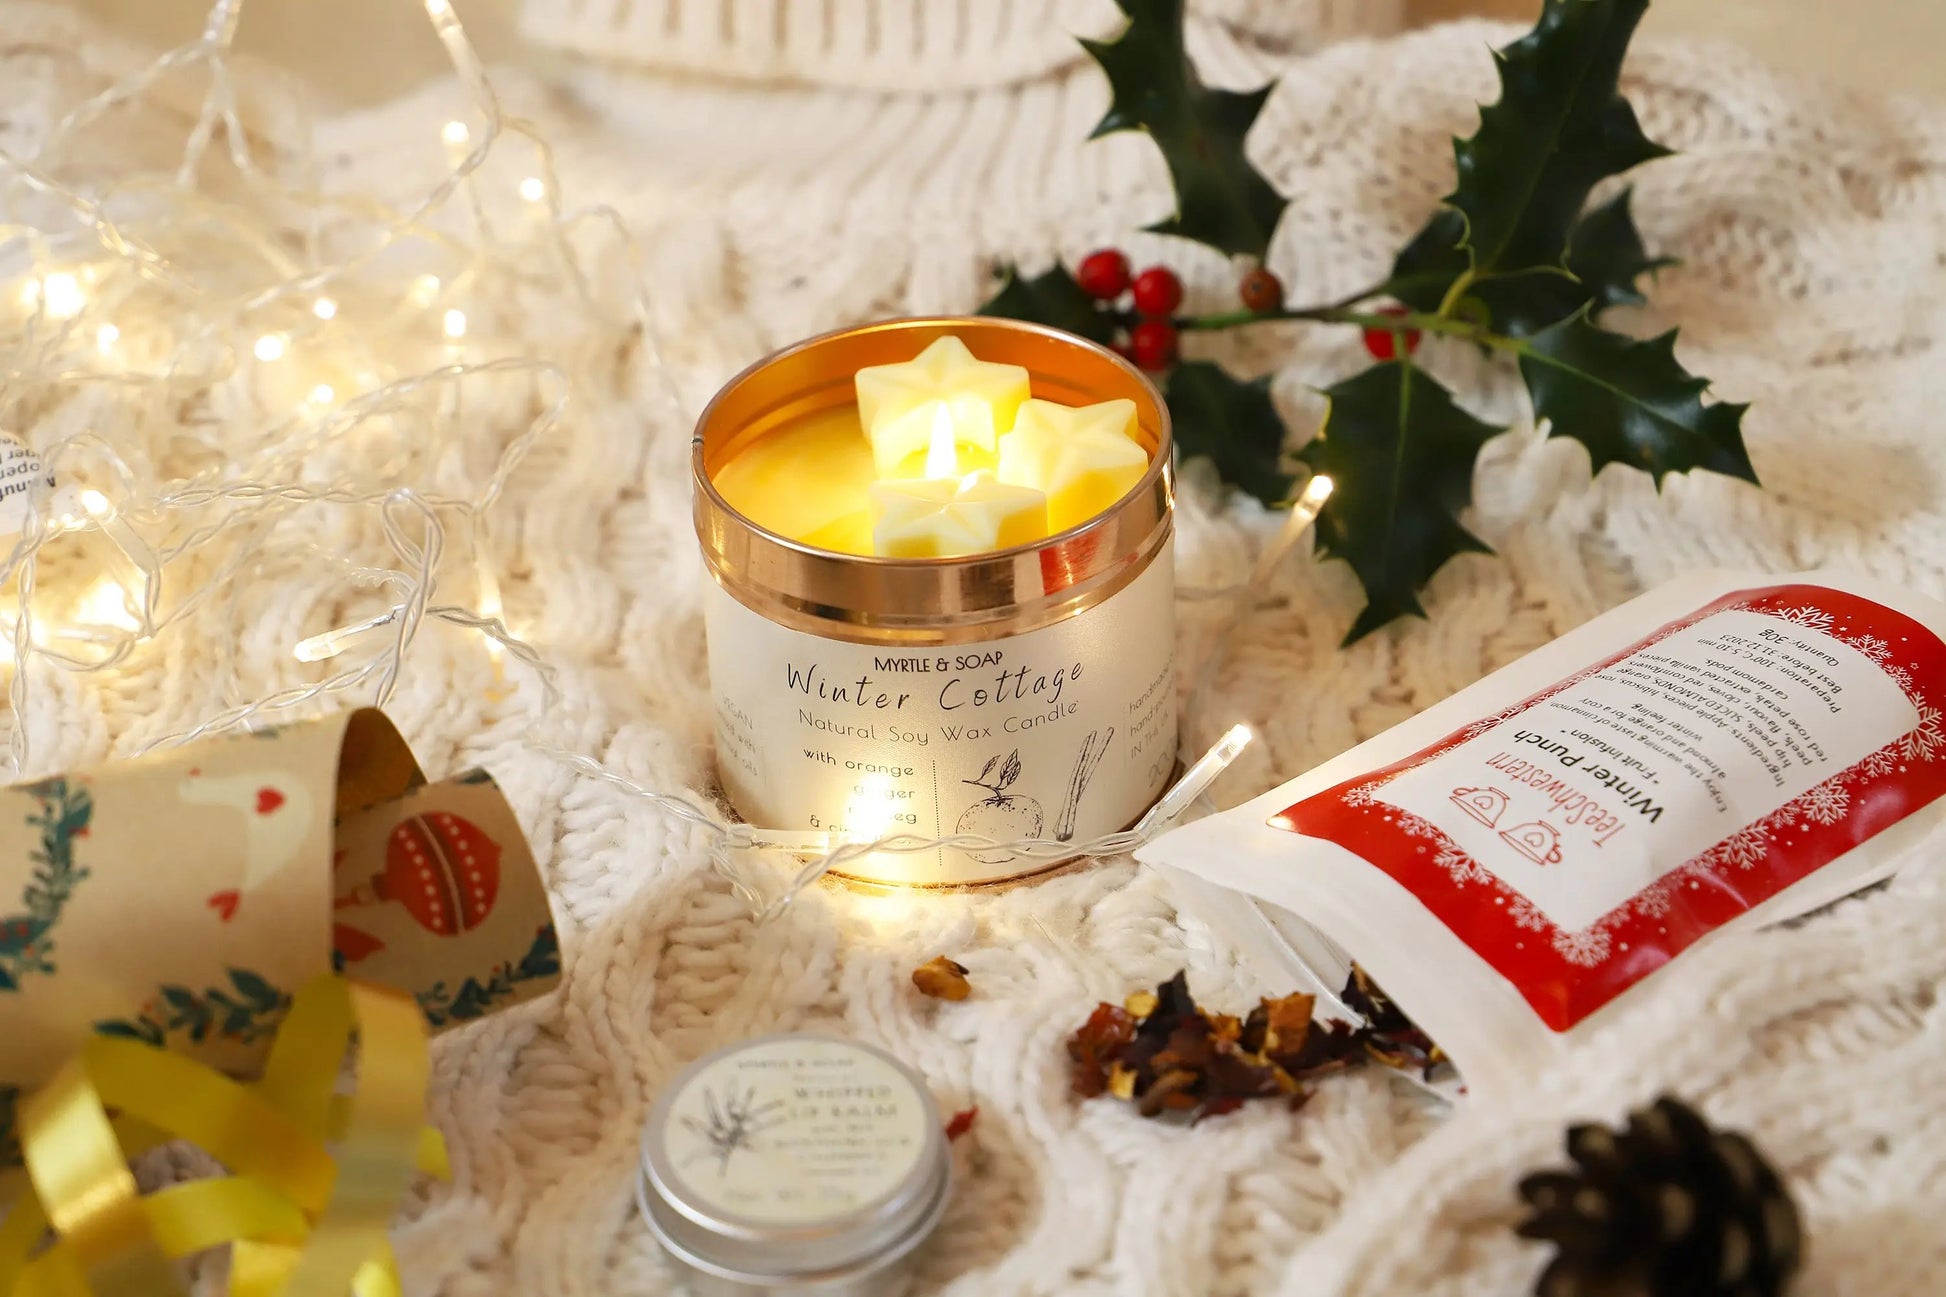 Winter Cottage Natural Soy Wax Candle